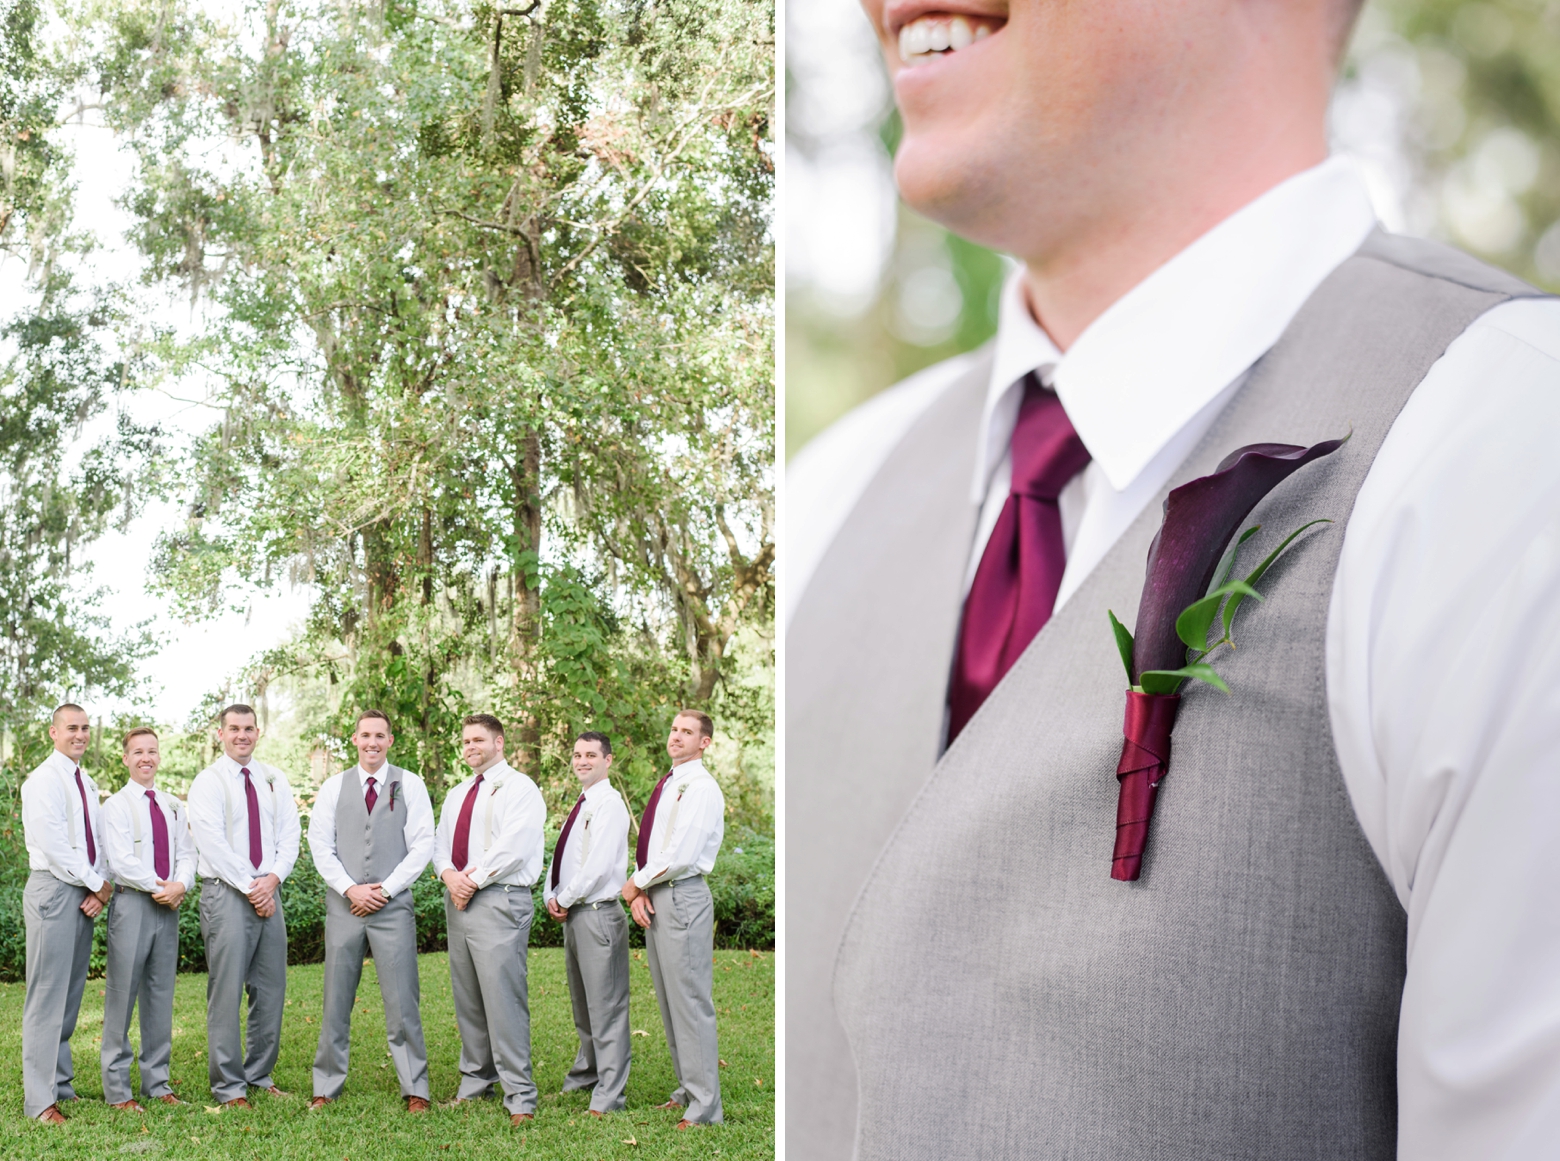 The Groom and his Groomsmen pose under the large trees on the Cross Creek Ranch property